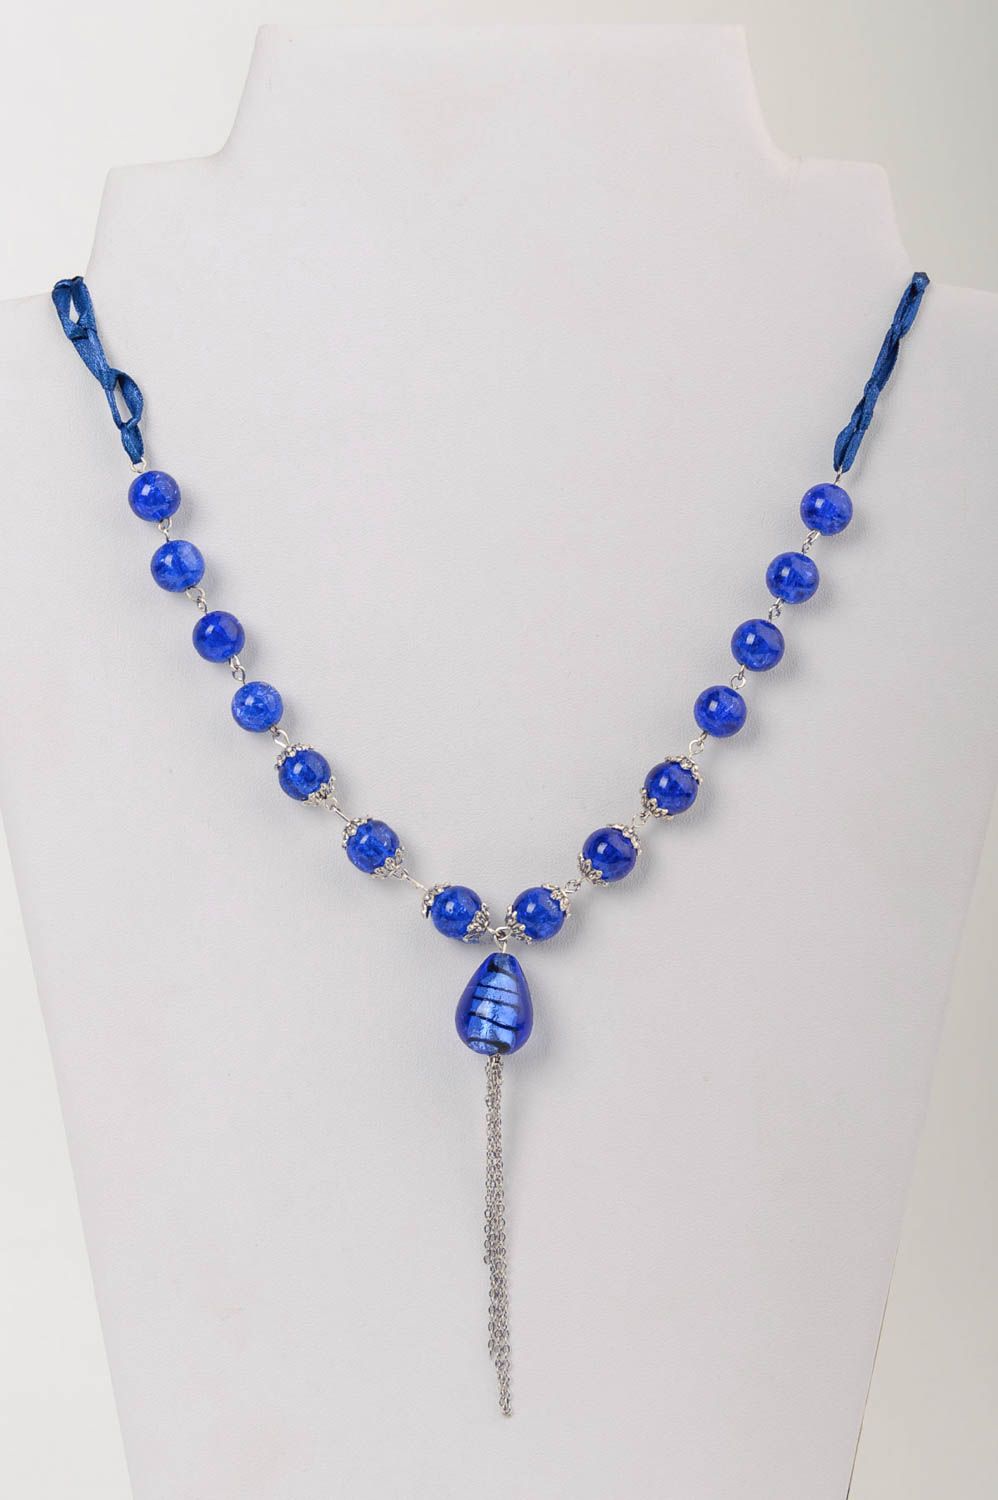 Handmade deep blue designer necklace with glass beads on satin ribbon photo 1